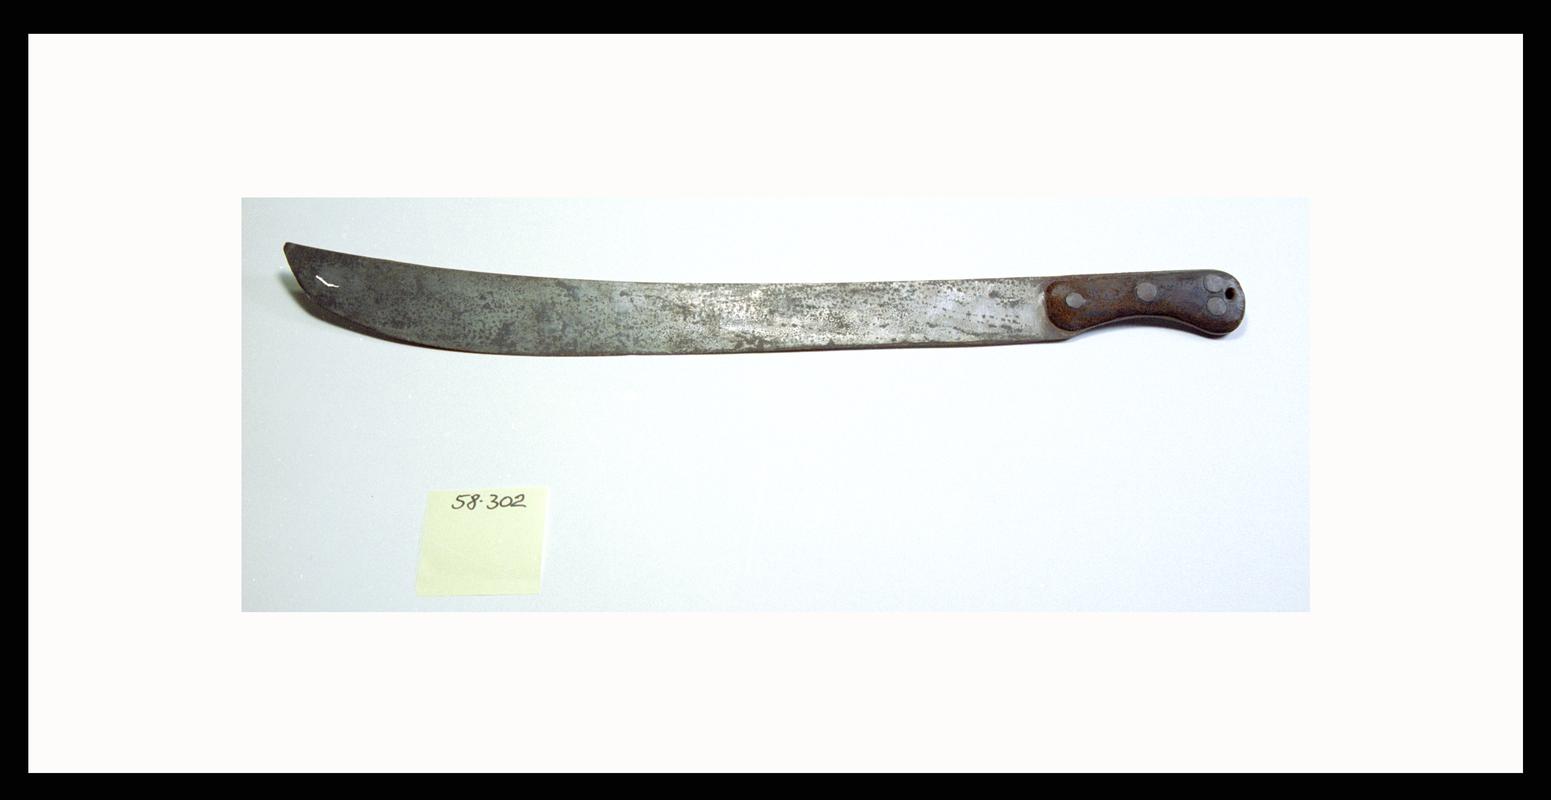 Opener&#039;s knife (&#039;hangar&#039;) as used at Old Castle Tinplate Works, Llanelly, c.1950.